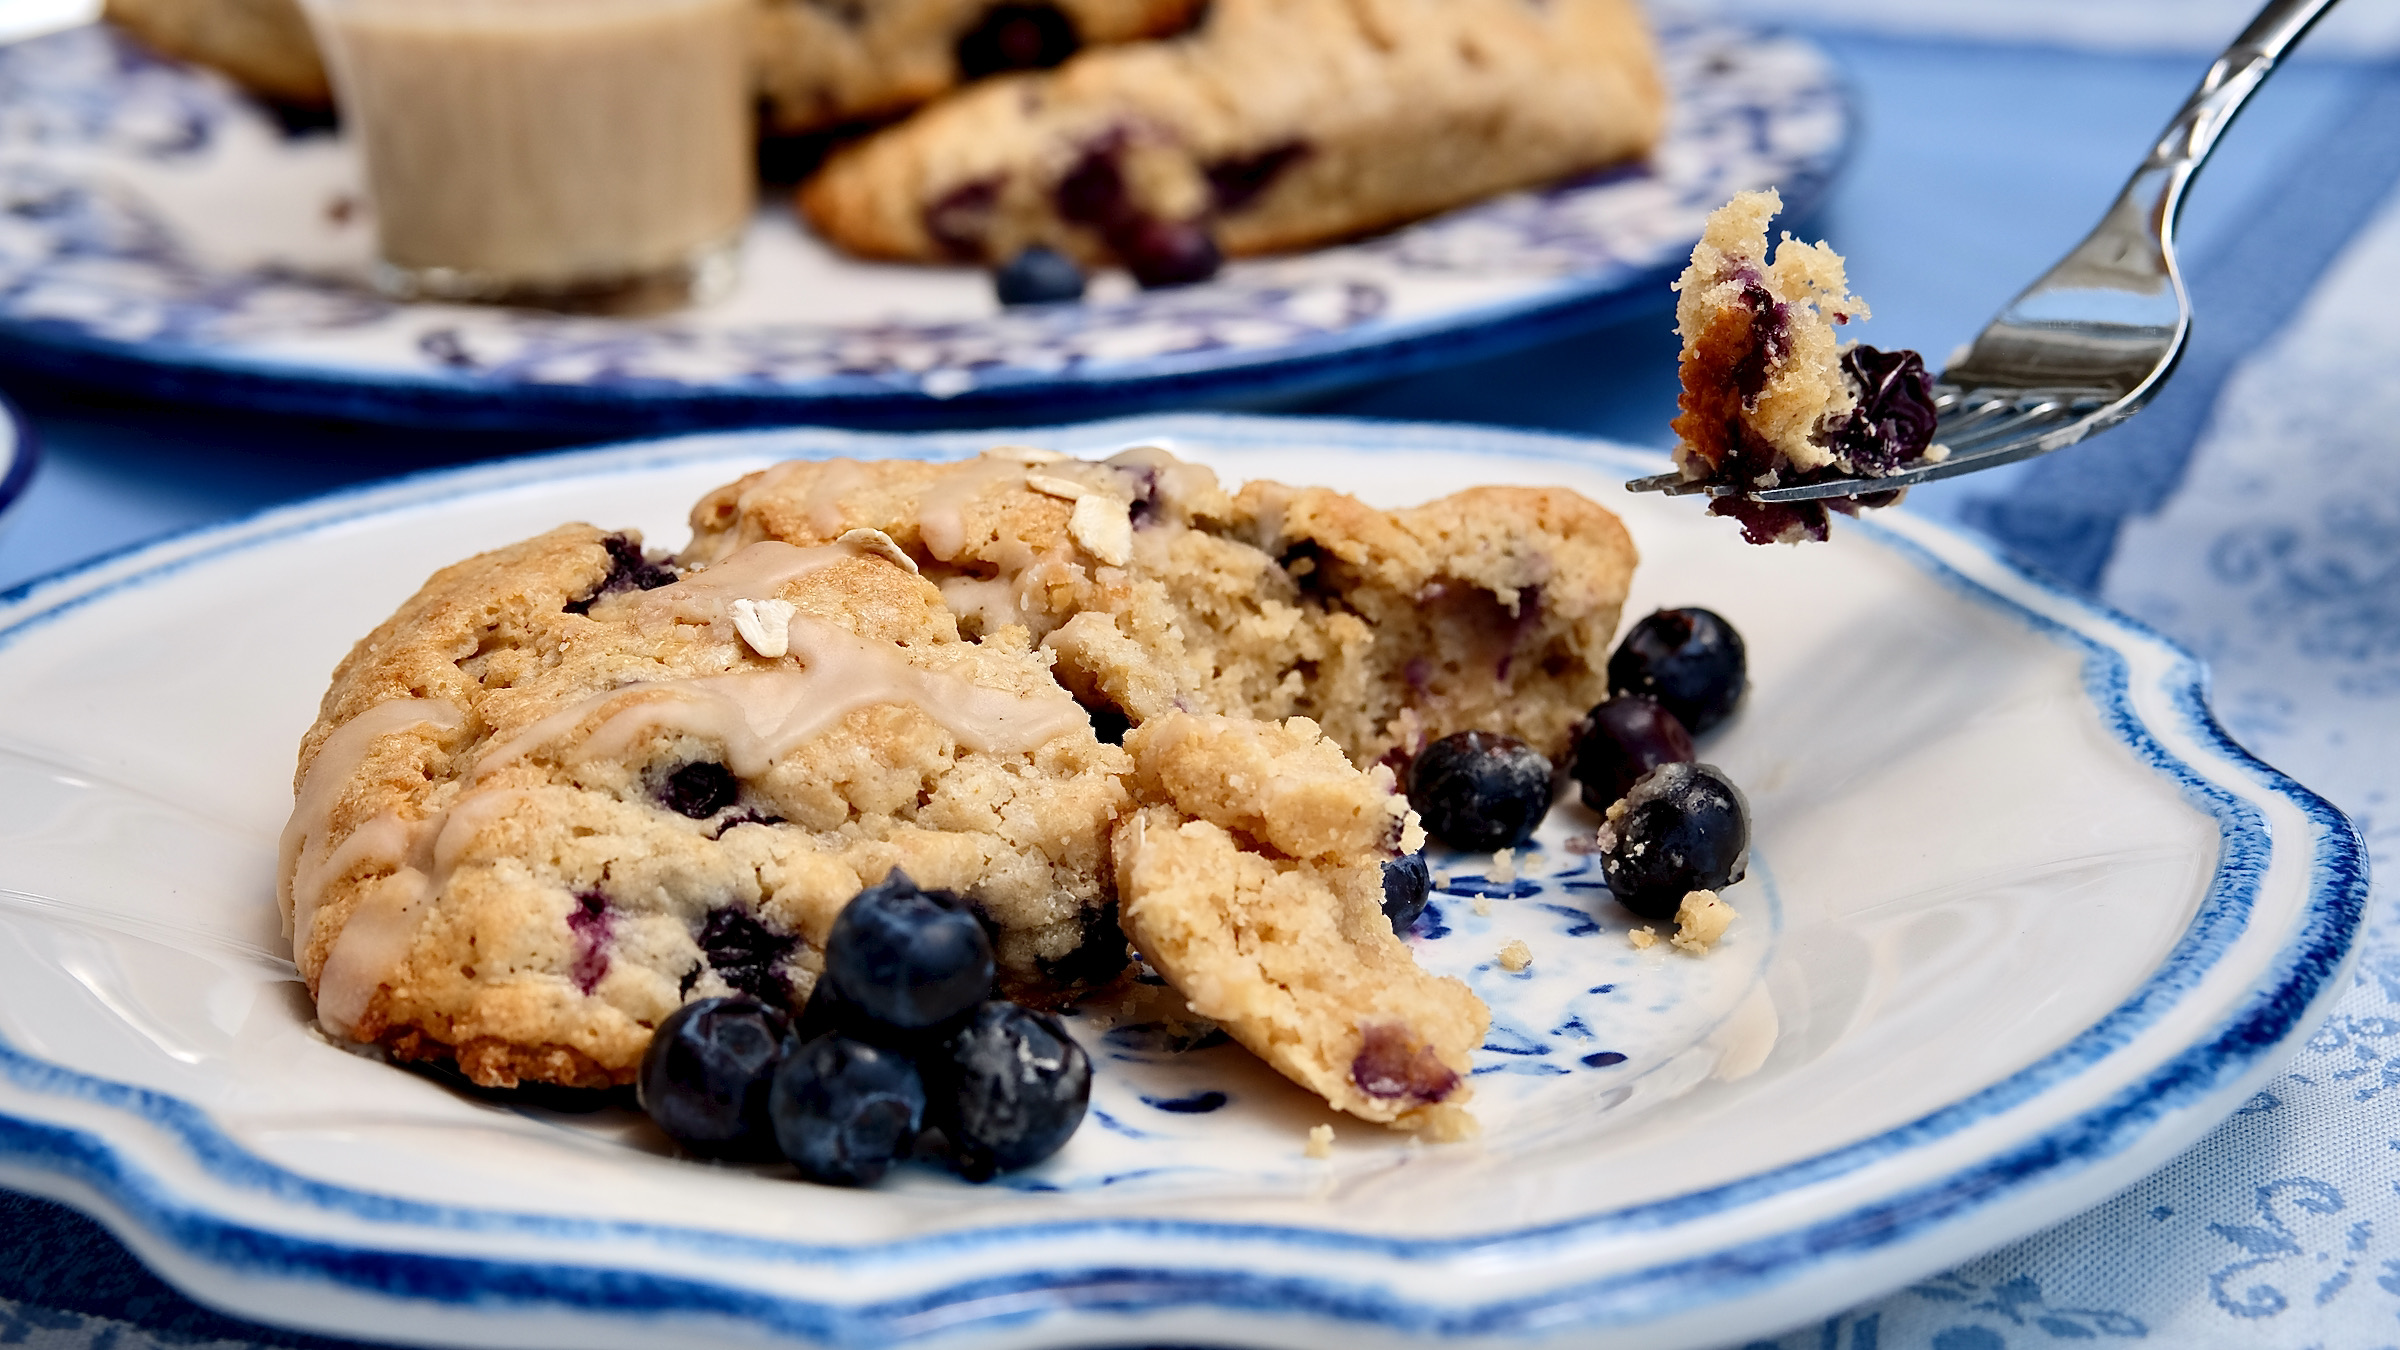 Oatmeal and Blueberry Scone served on a white and blue plate showing a bite shot of scone. Blue and white platter of scones with maple glaze is set in the background.